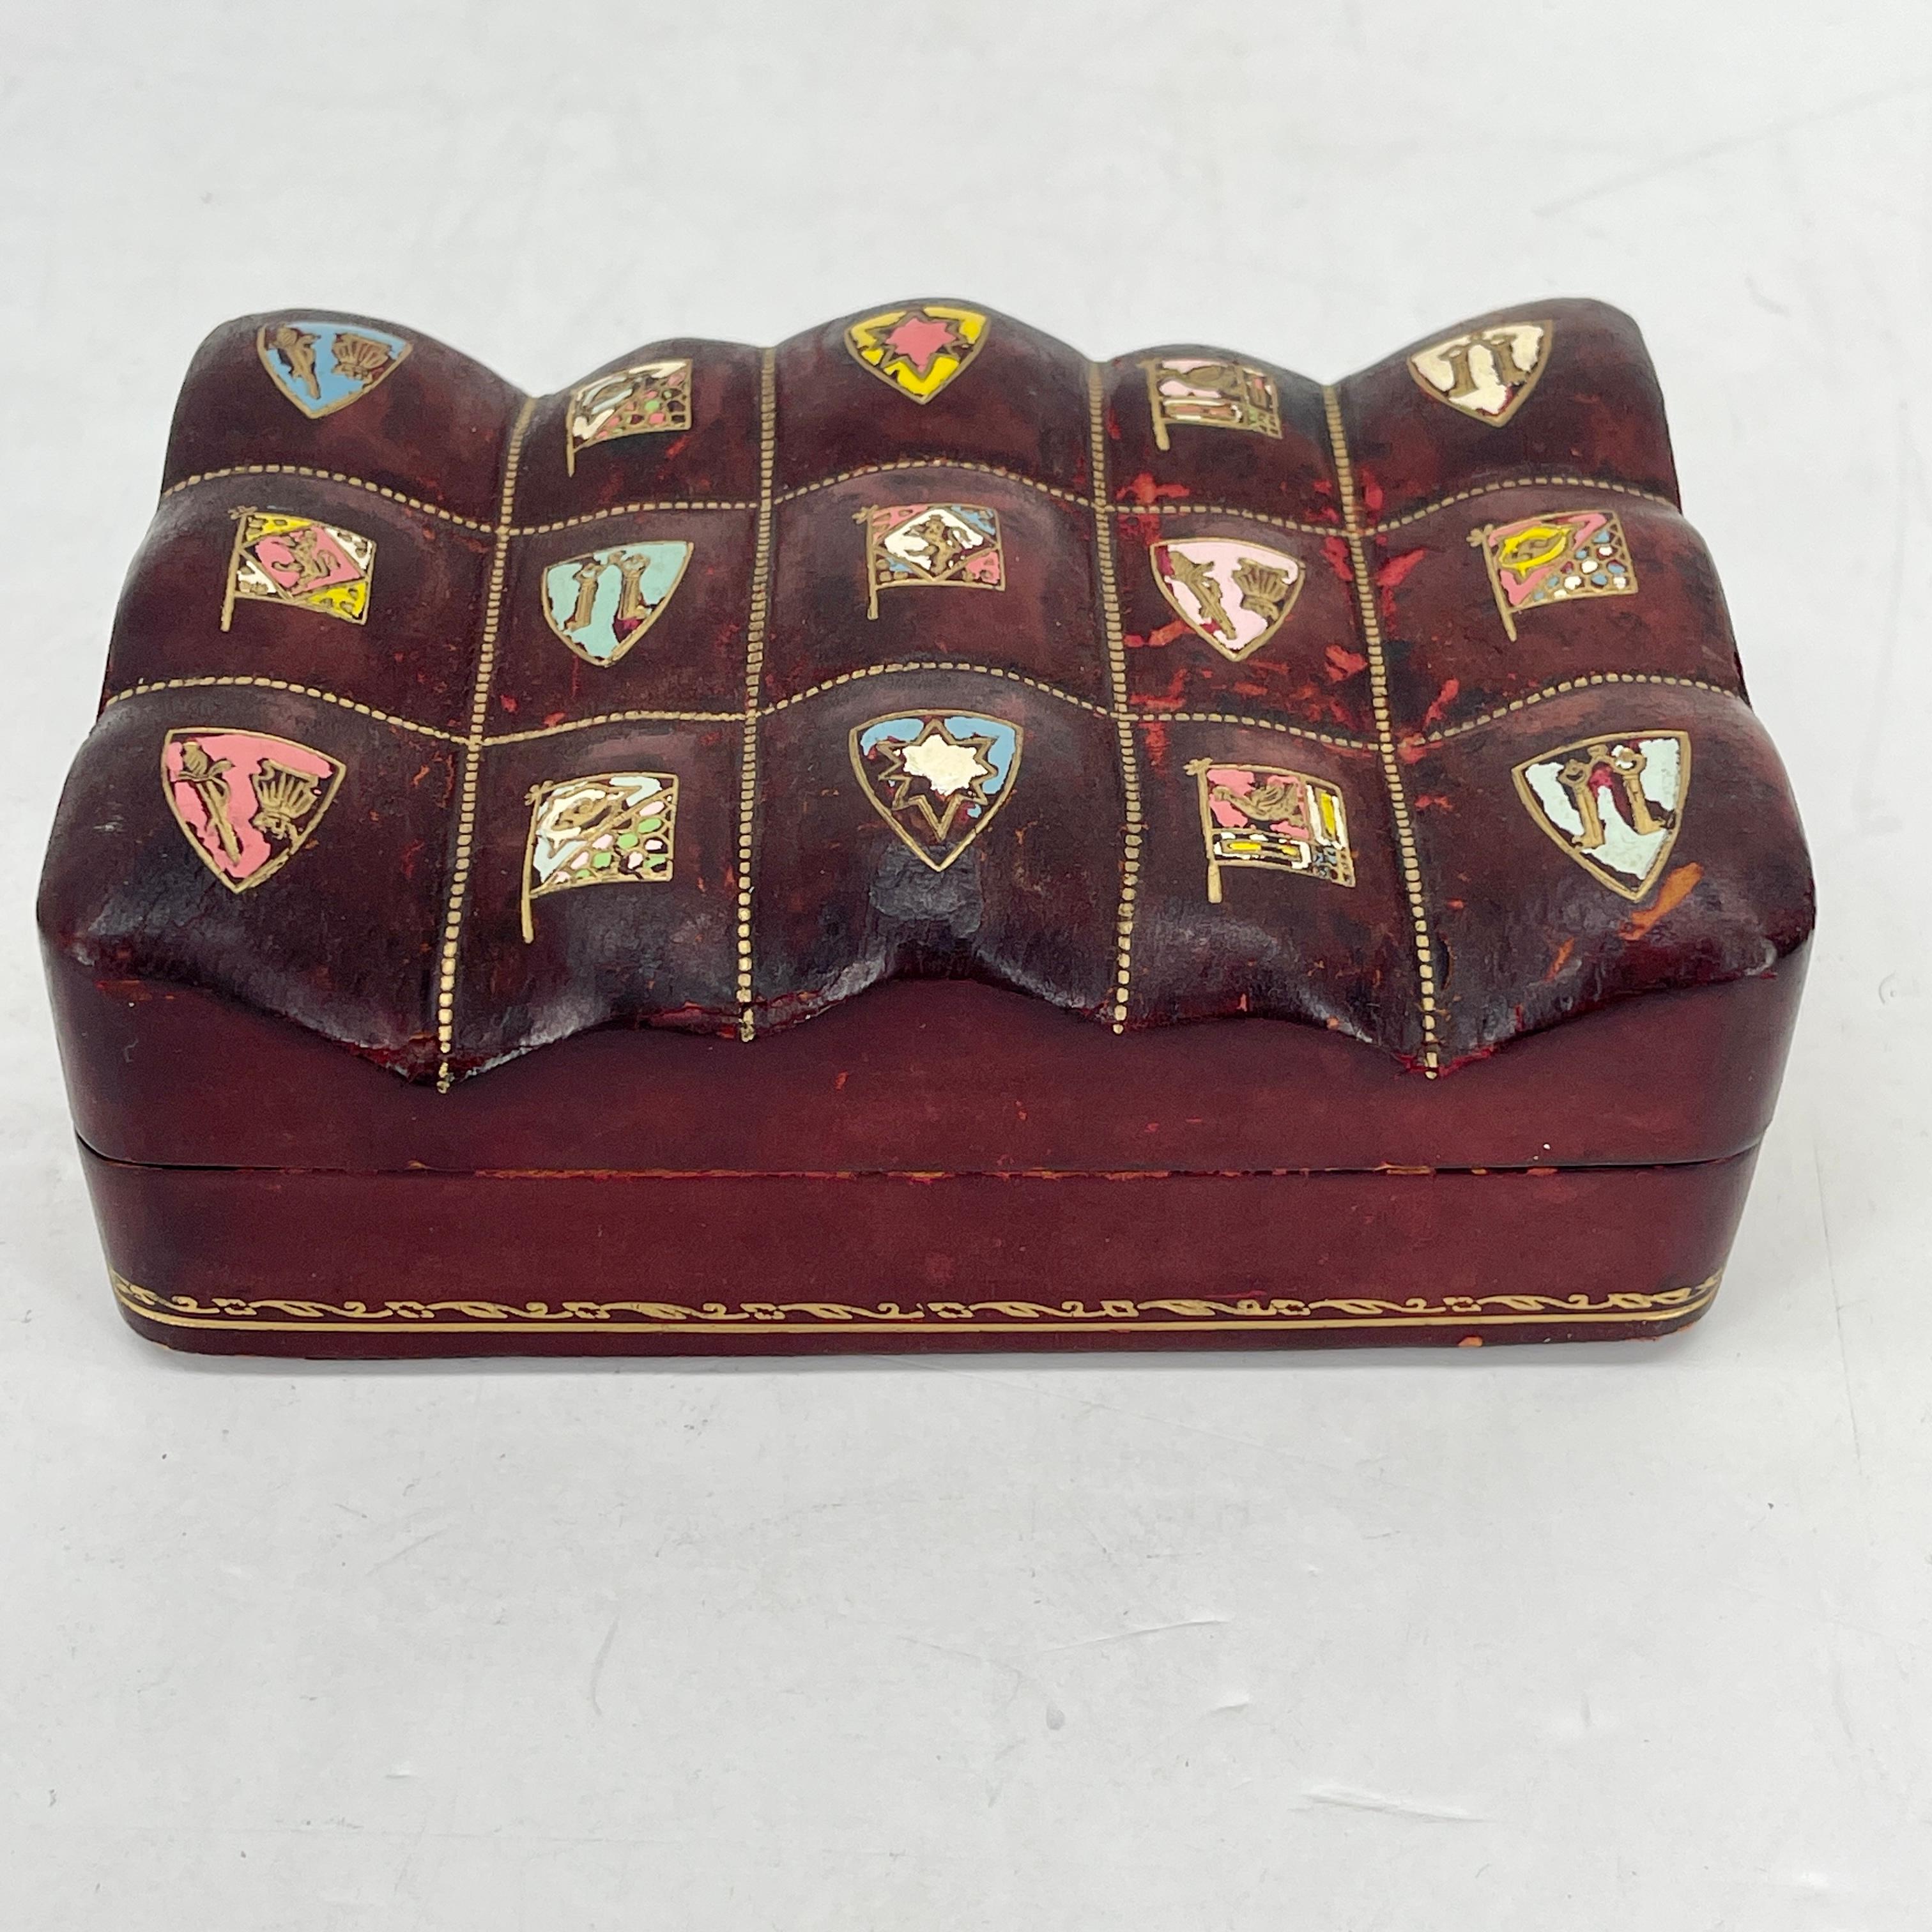 Hand-Crafted Vintage Italian Jewelry Box in Burgundy Leather, Circa 1950's For Sale